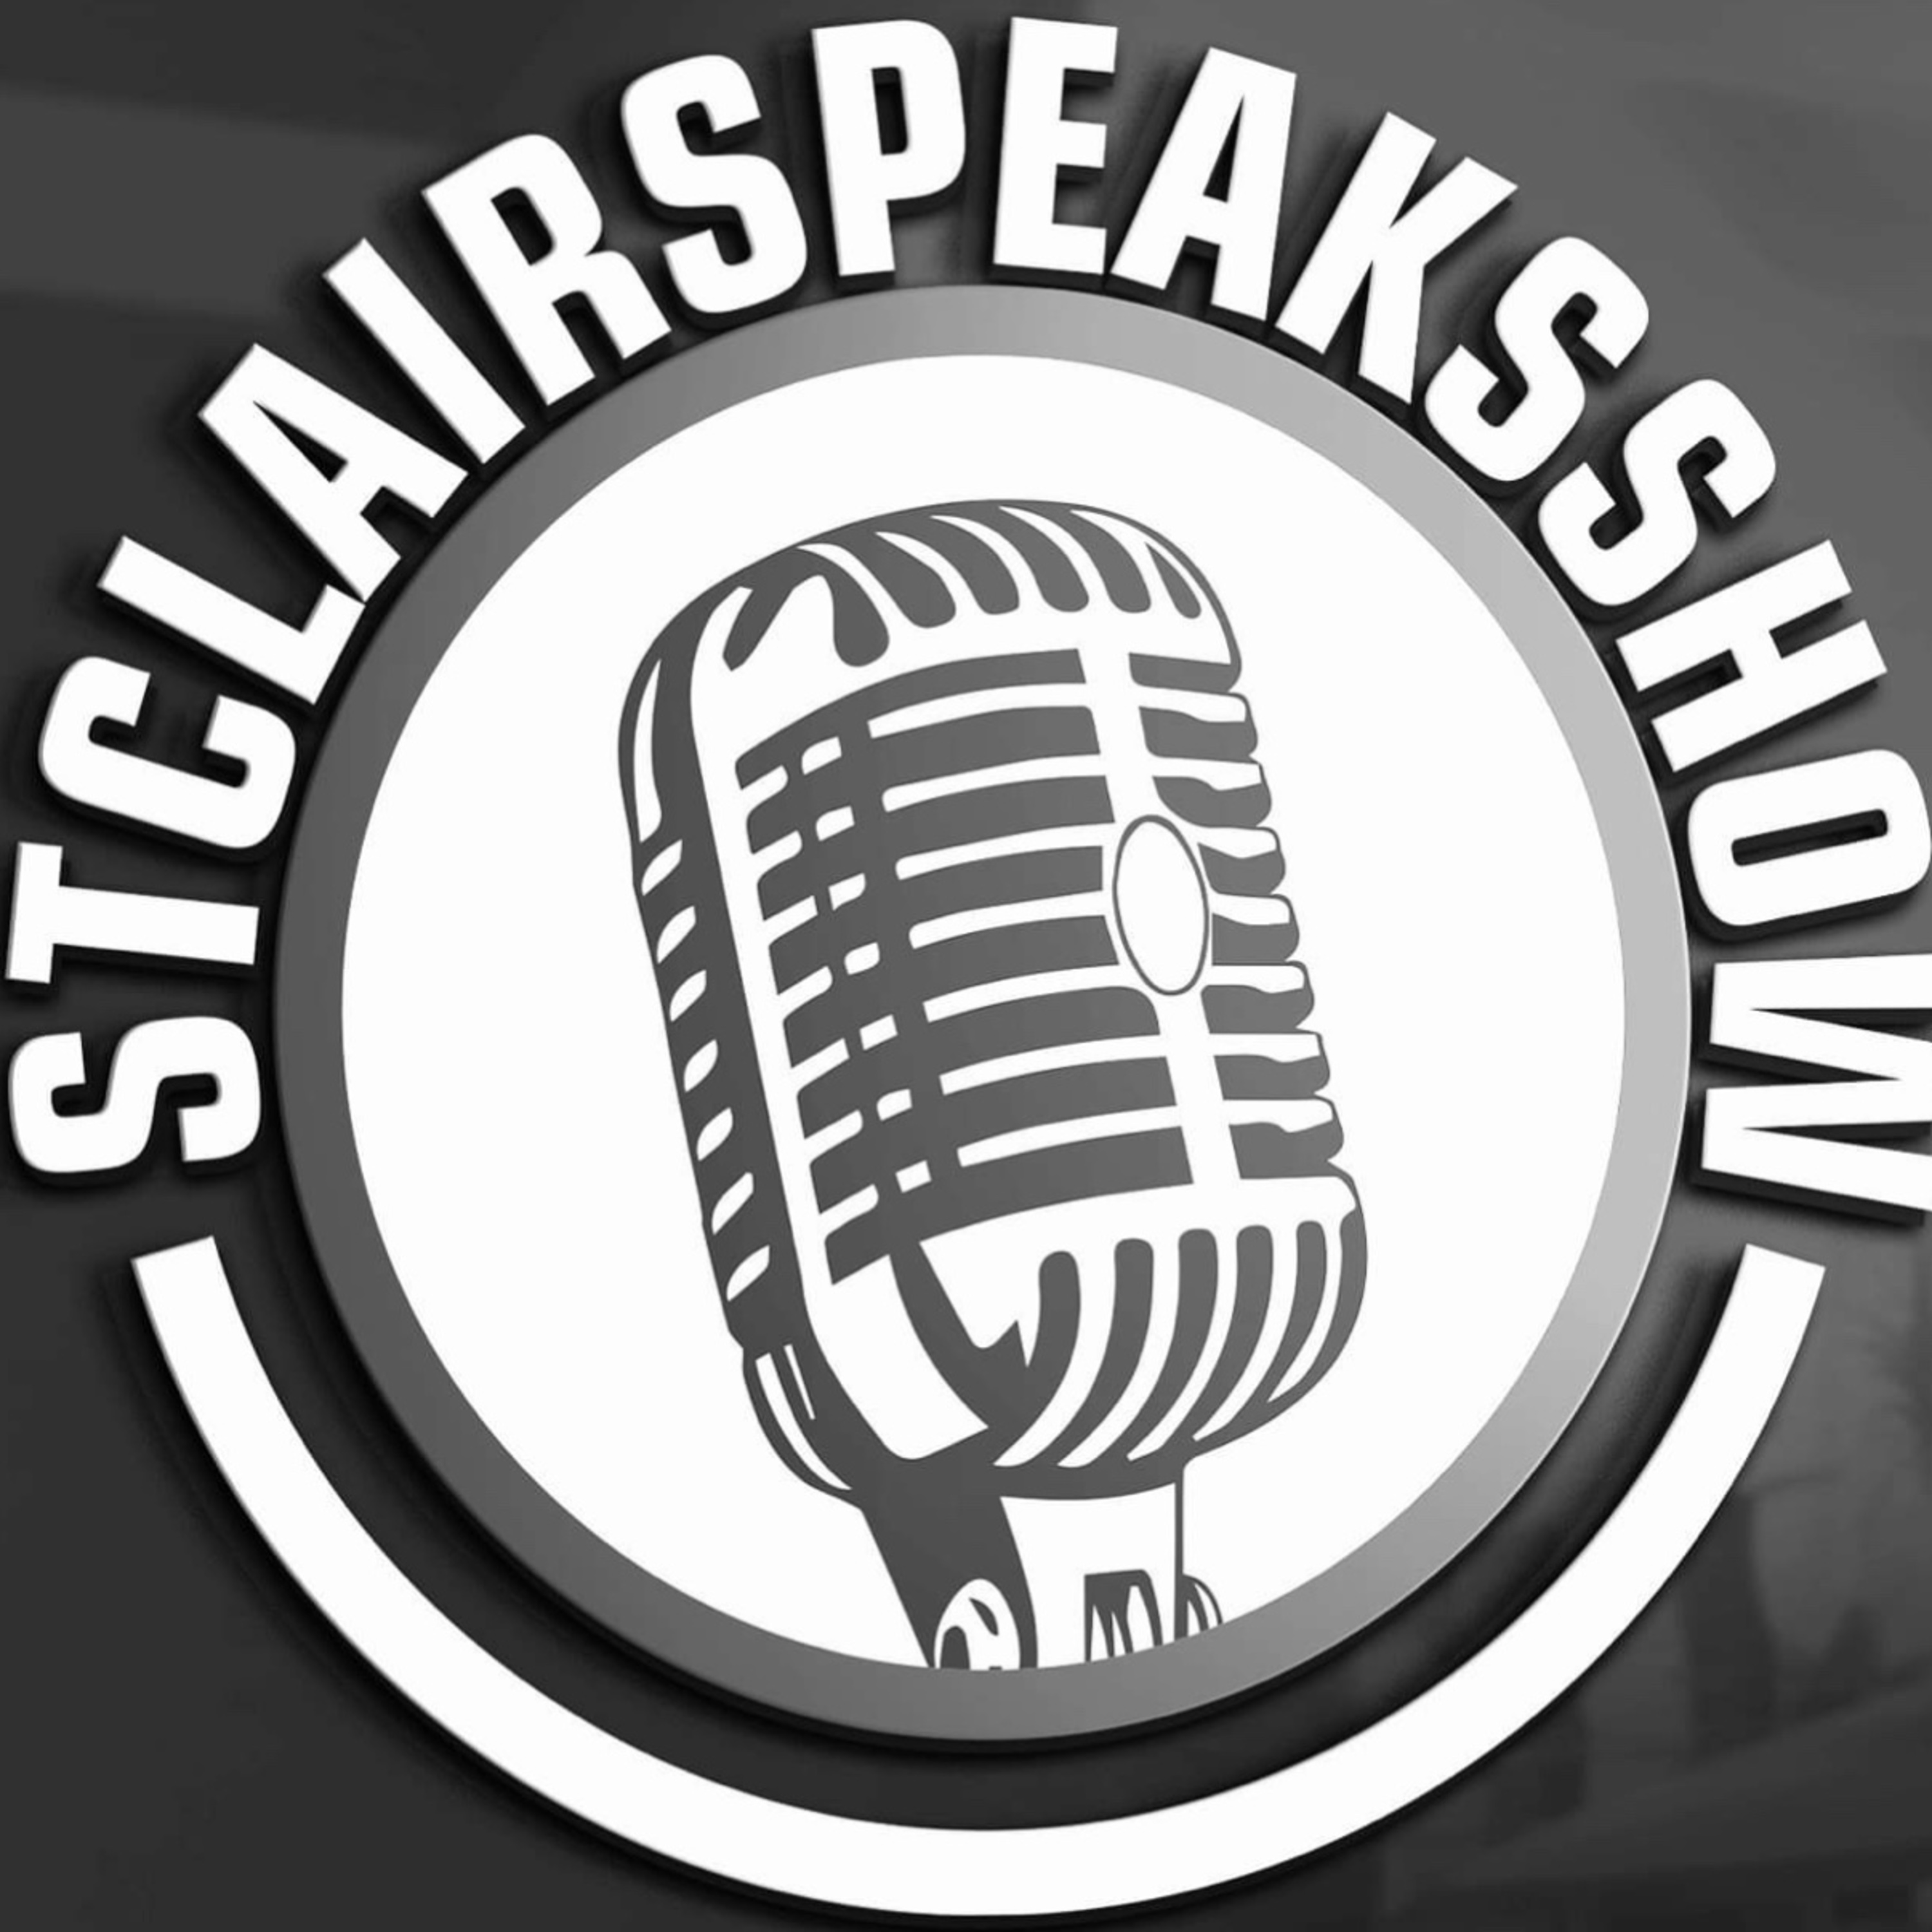 StclairSpeaksShow Ep. 09 Featuring Larry Apkes from Job Hackers